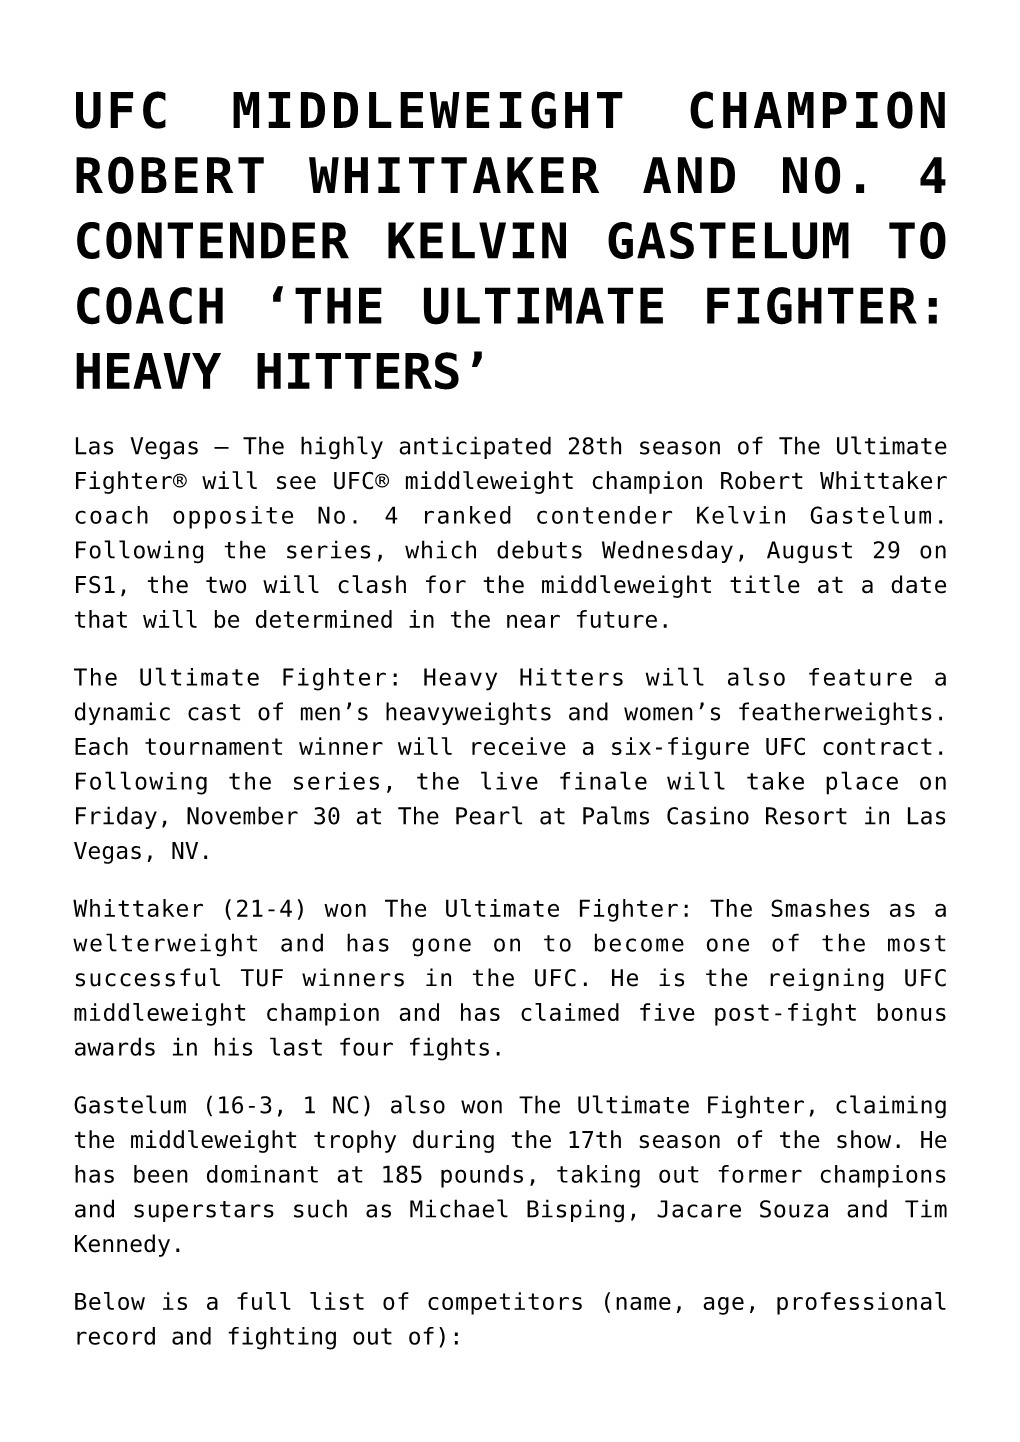 Ufc Middleweight Champion Robert Whittaker and No. 4 Contender Kelvin Gastelum to Coach 'The Ultimate Fighter: Heavy Hitters